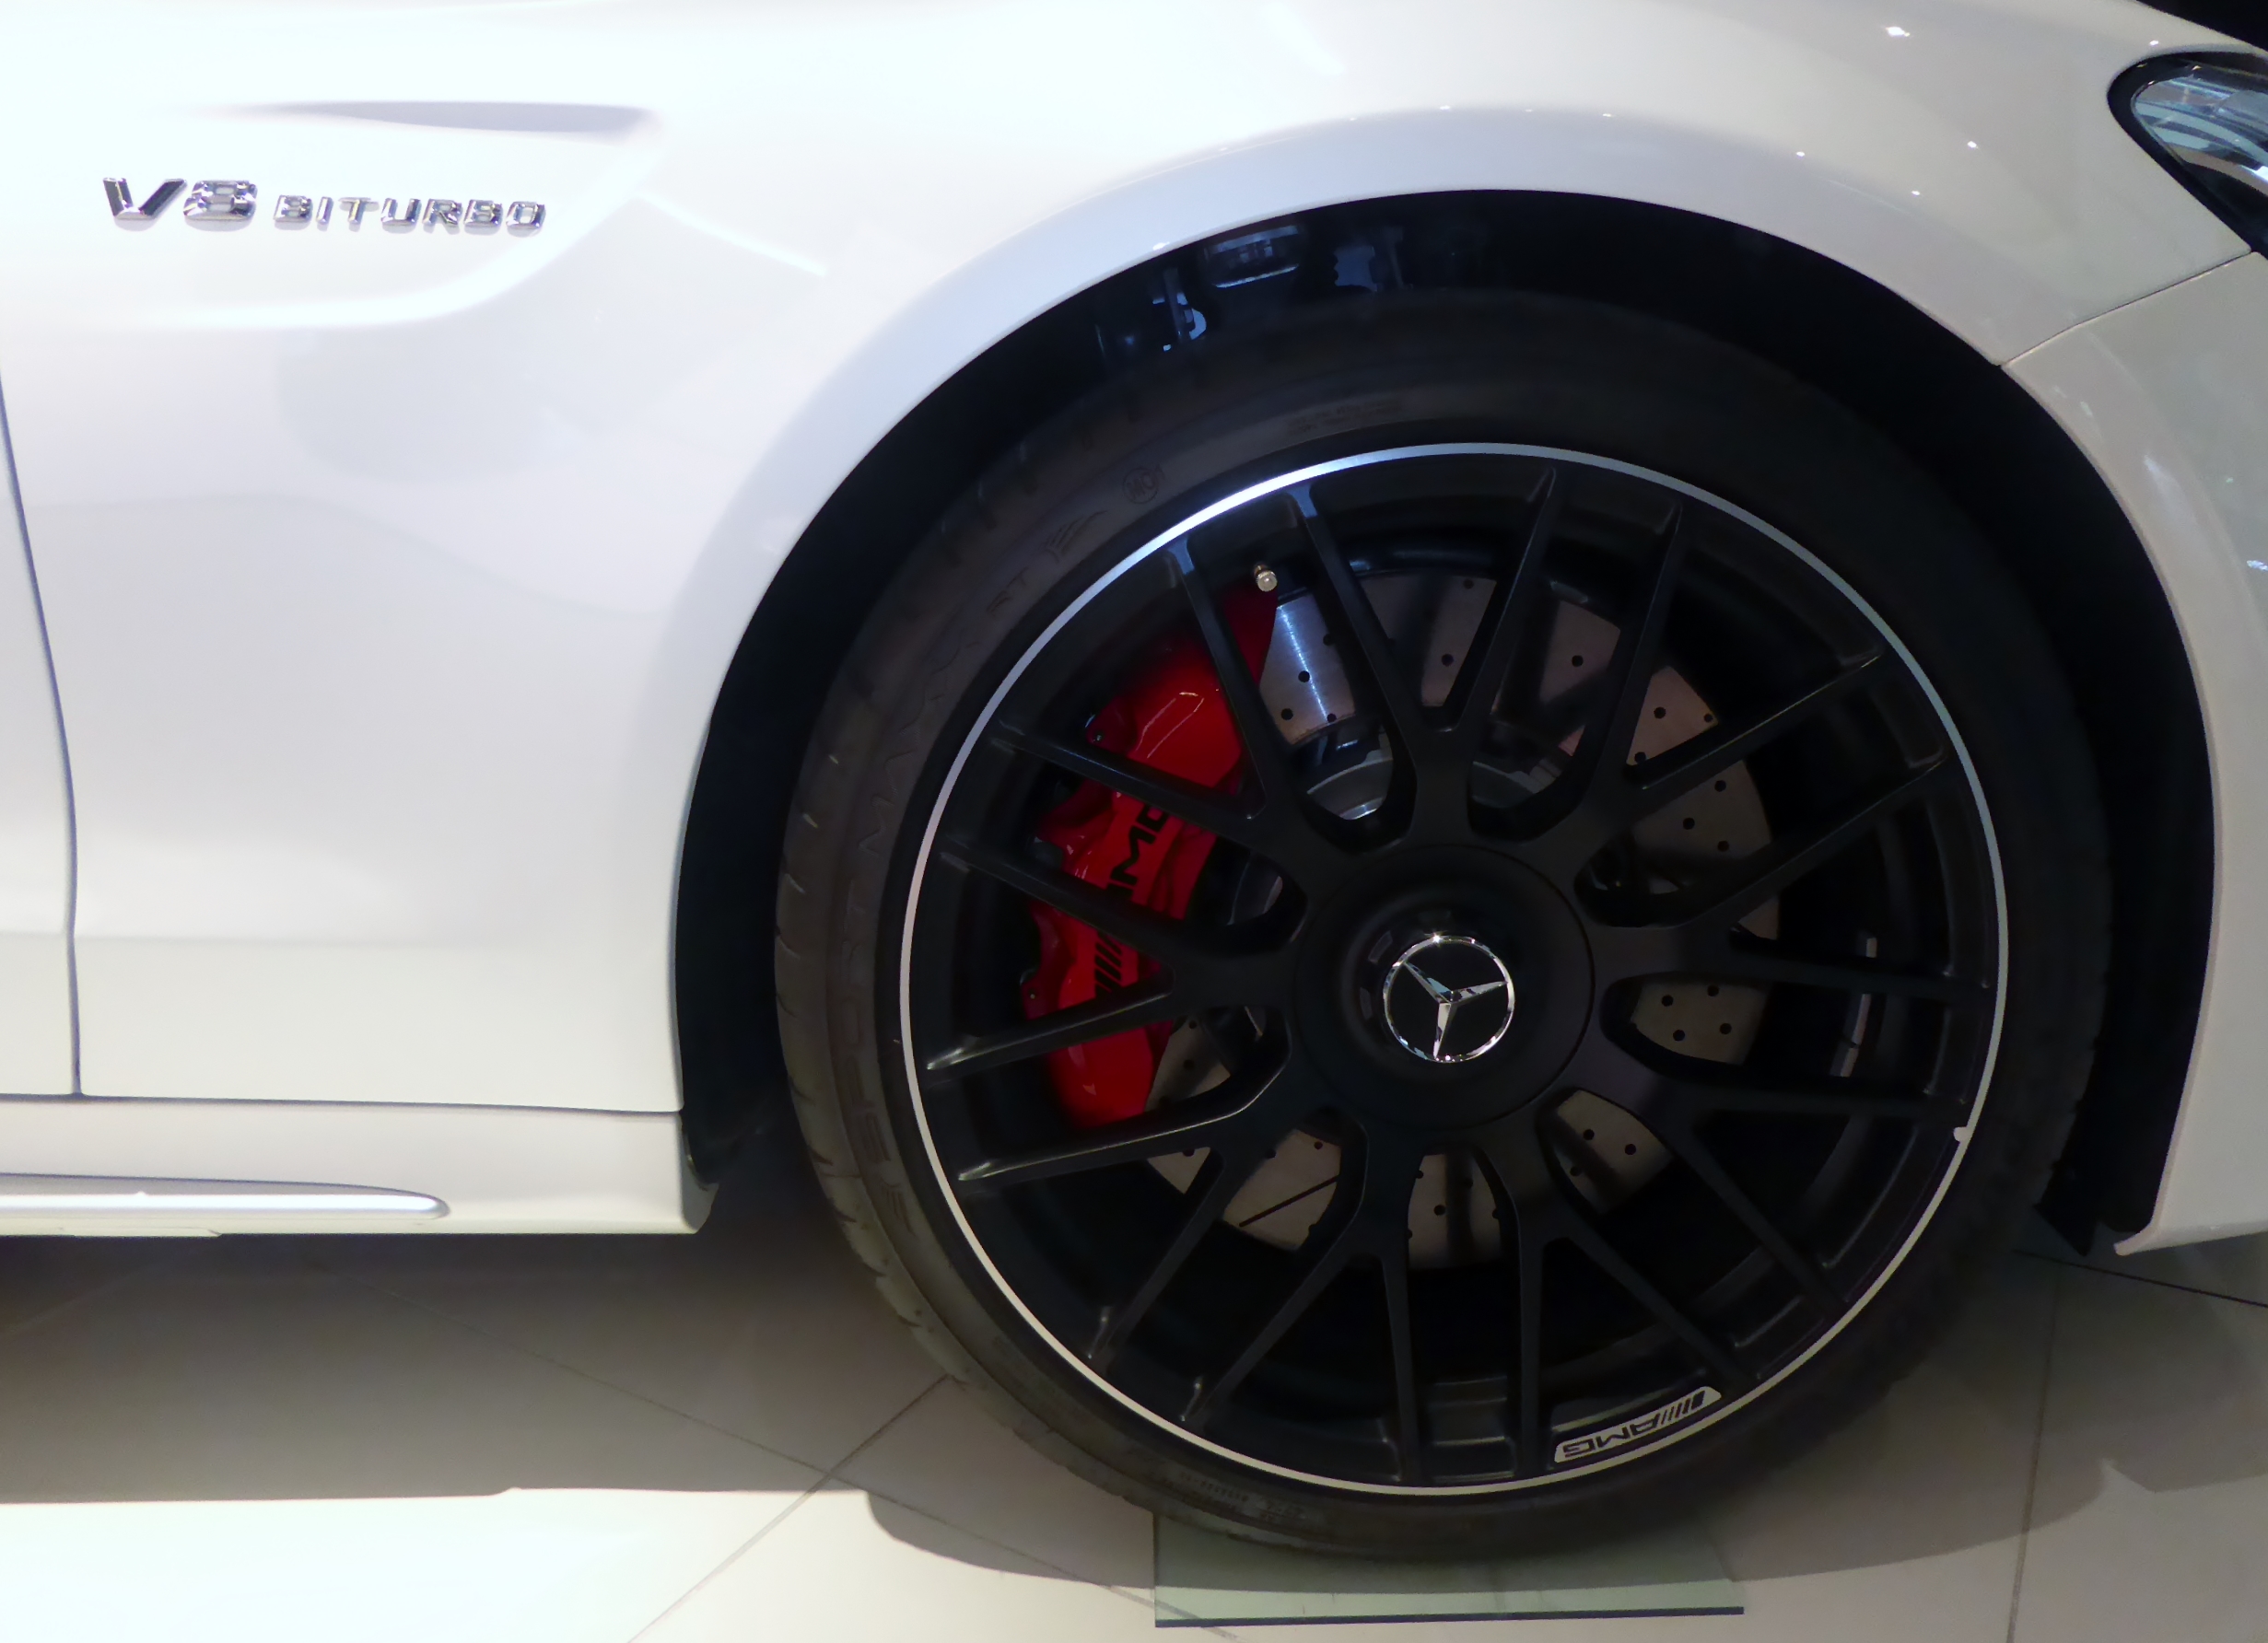 File:The tire wheel of Mercedes-AMG C63 S (W205).JPG - Wikimedia Commons